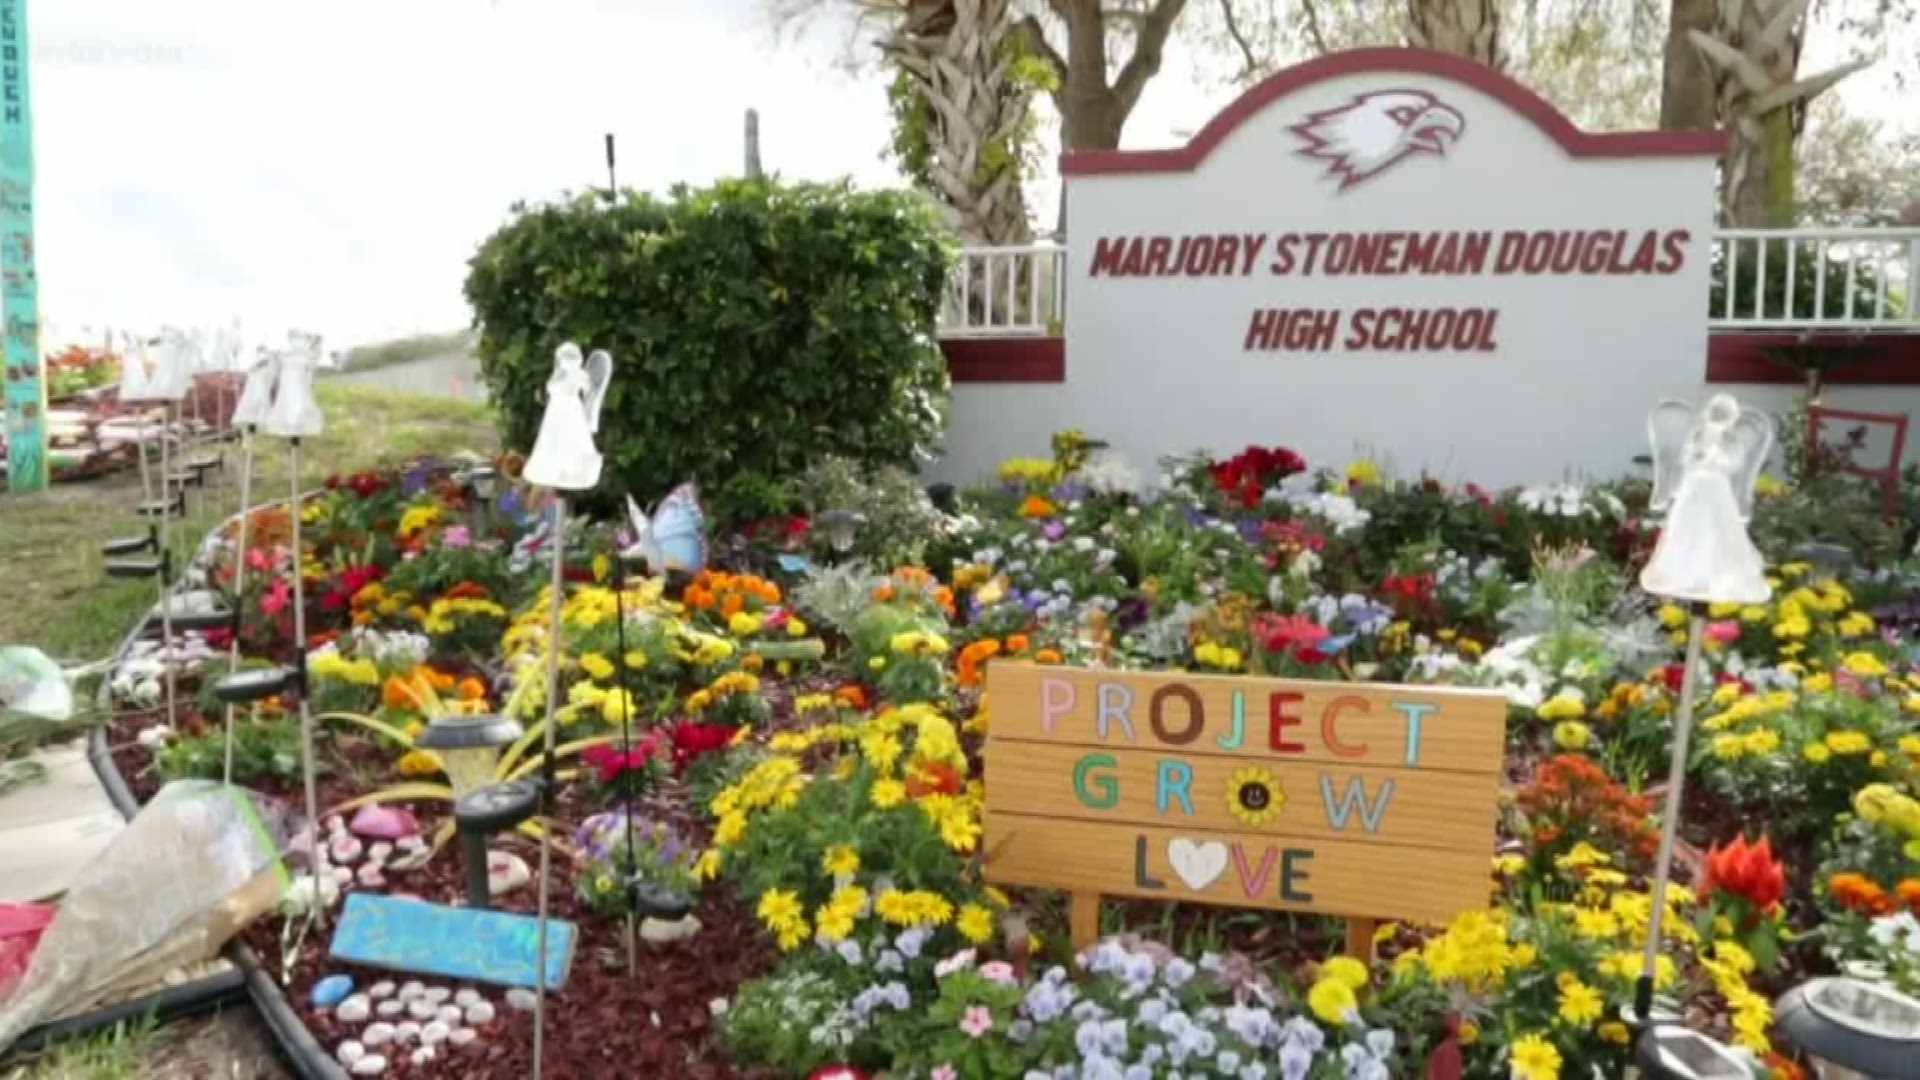 One year ago today, a teenager walked into Marjory Stoneman Douglas High School in Parkland, Fla., and shot and killed 17 people.